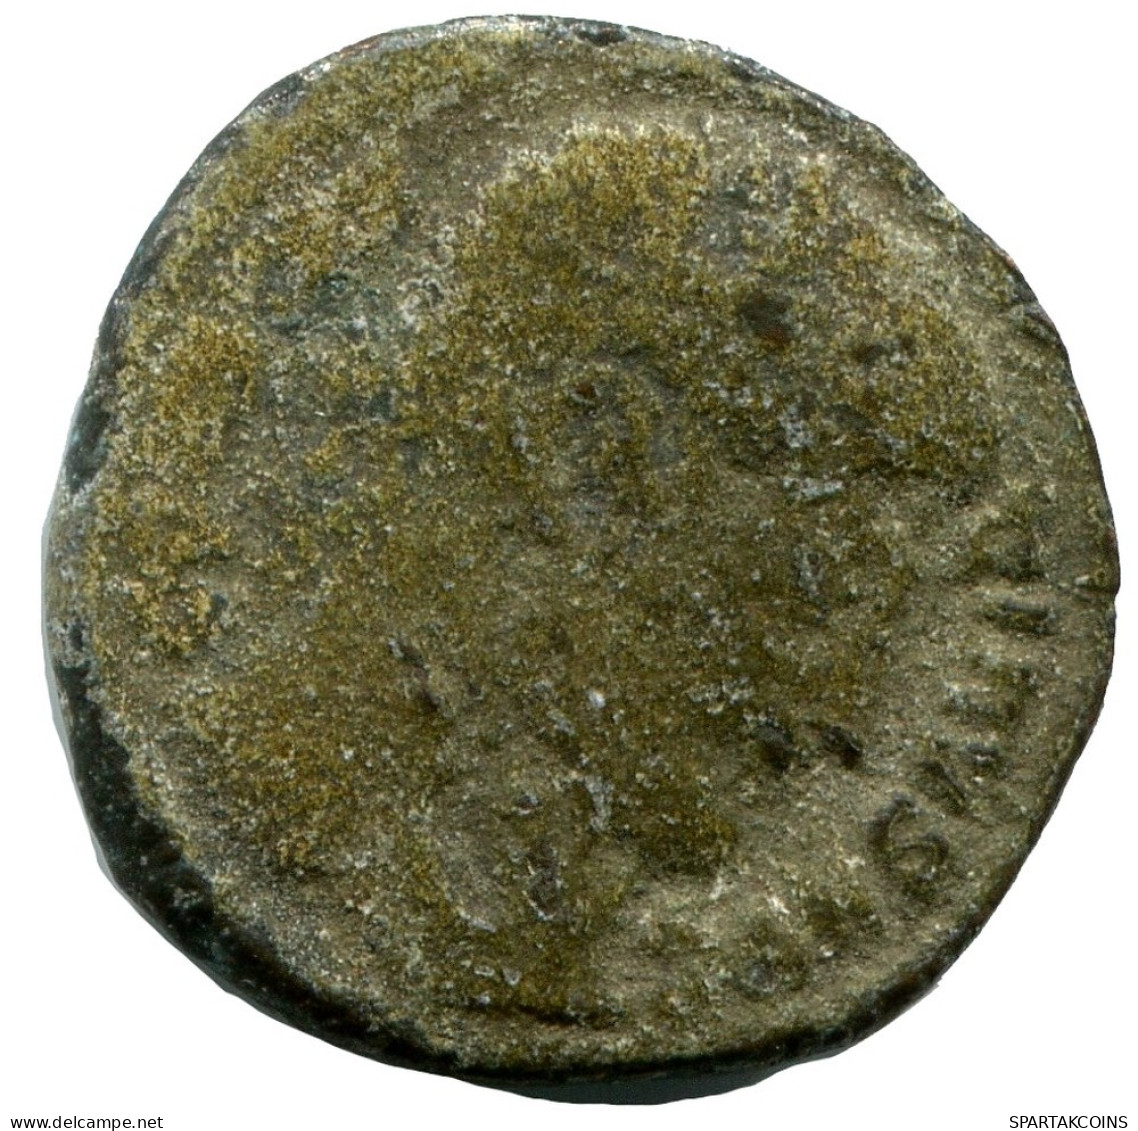 CONSTANTINE I MINTED IN ANTIOCH FROM THE ROYAL ONTARIO MUSEUM #ANC10676.14.U.A - The Christian Empire (307 AD To 363 AD)